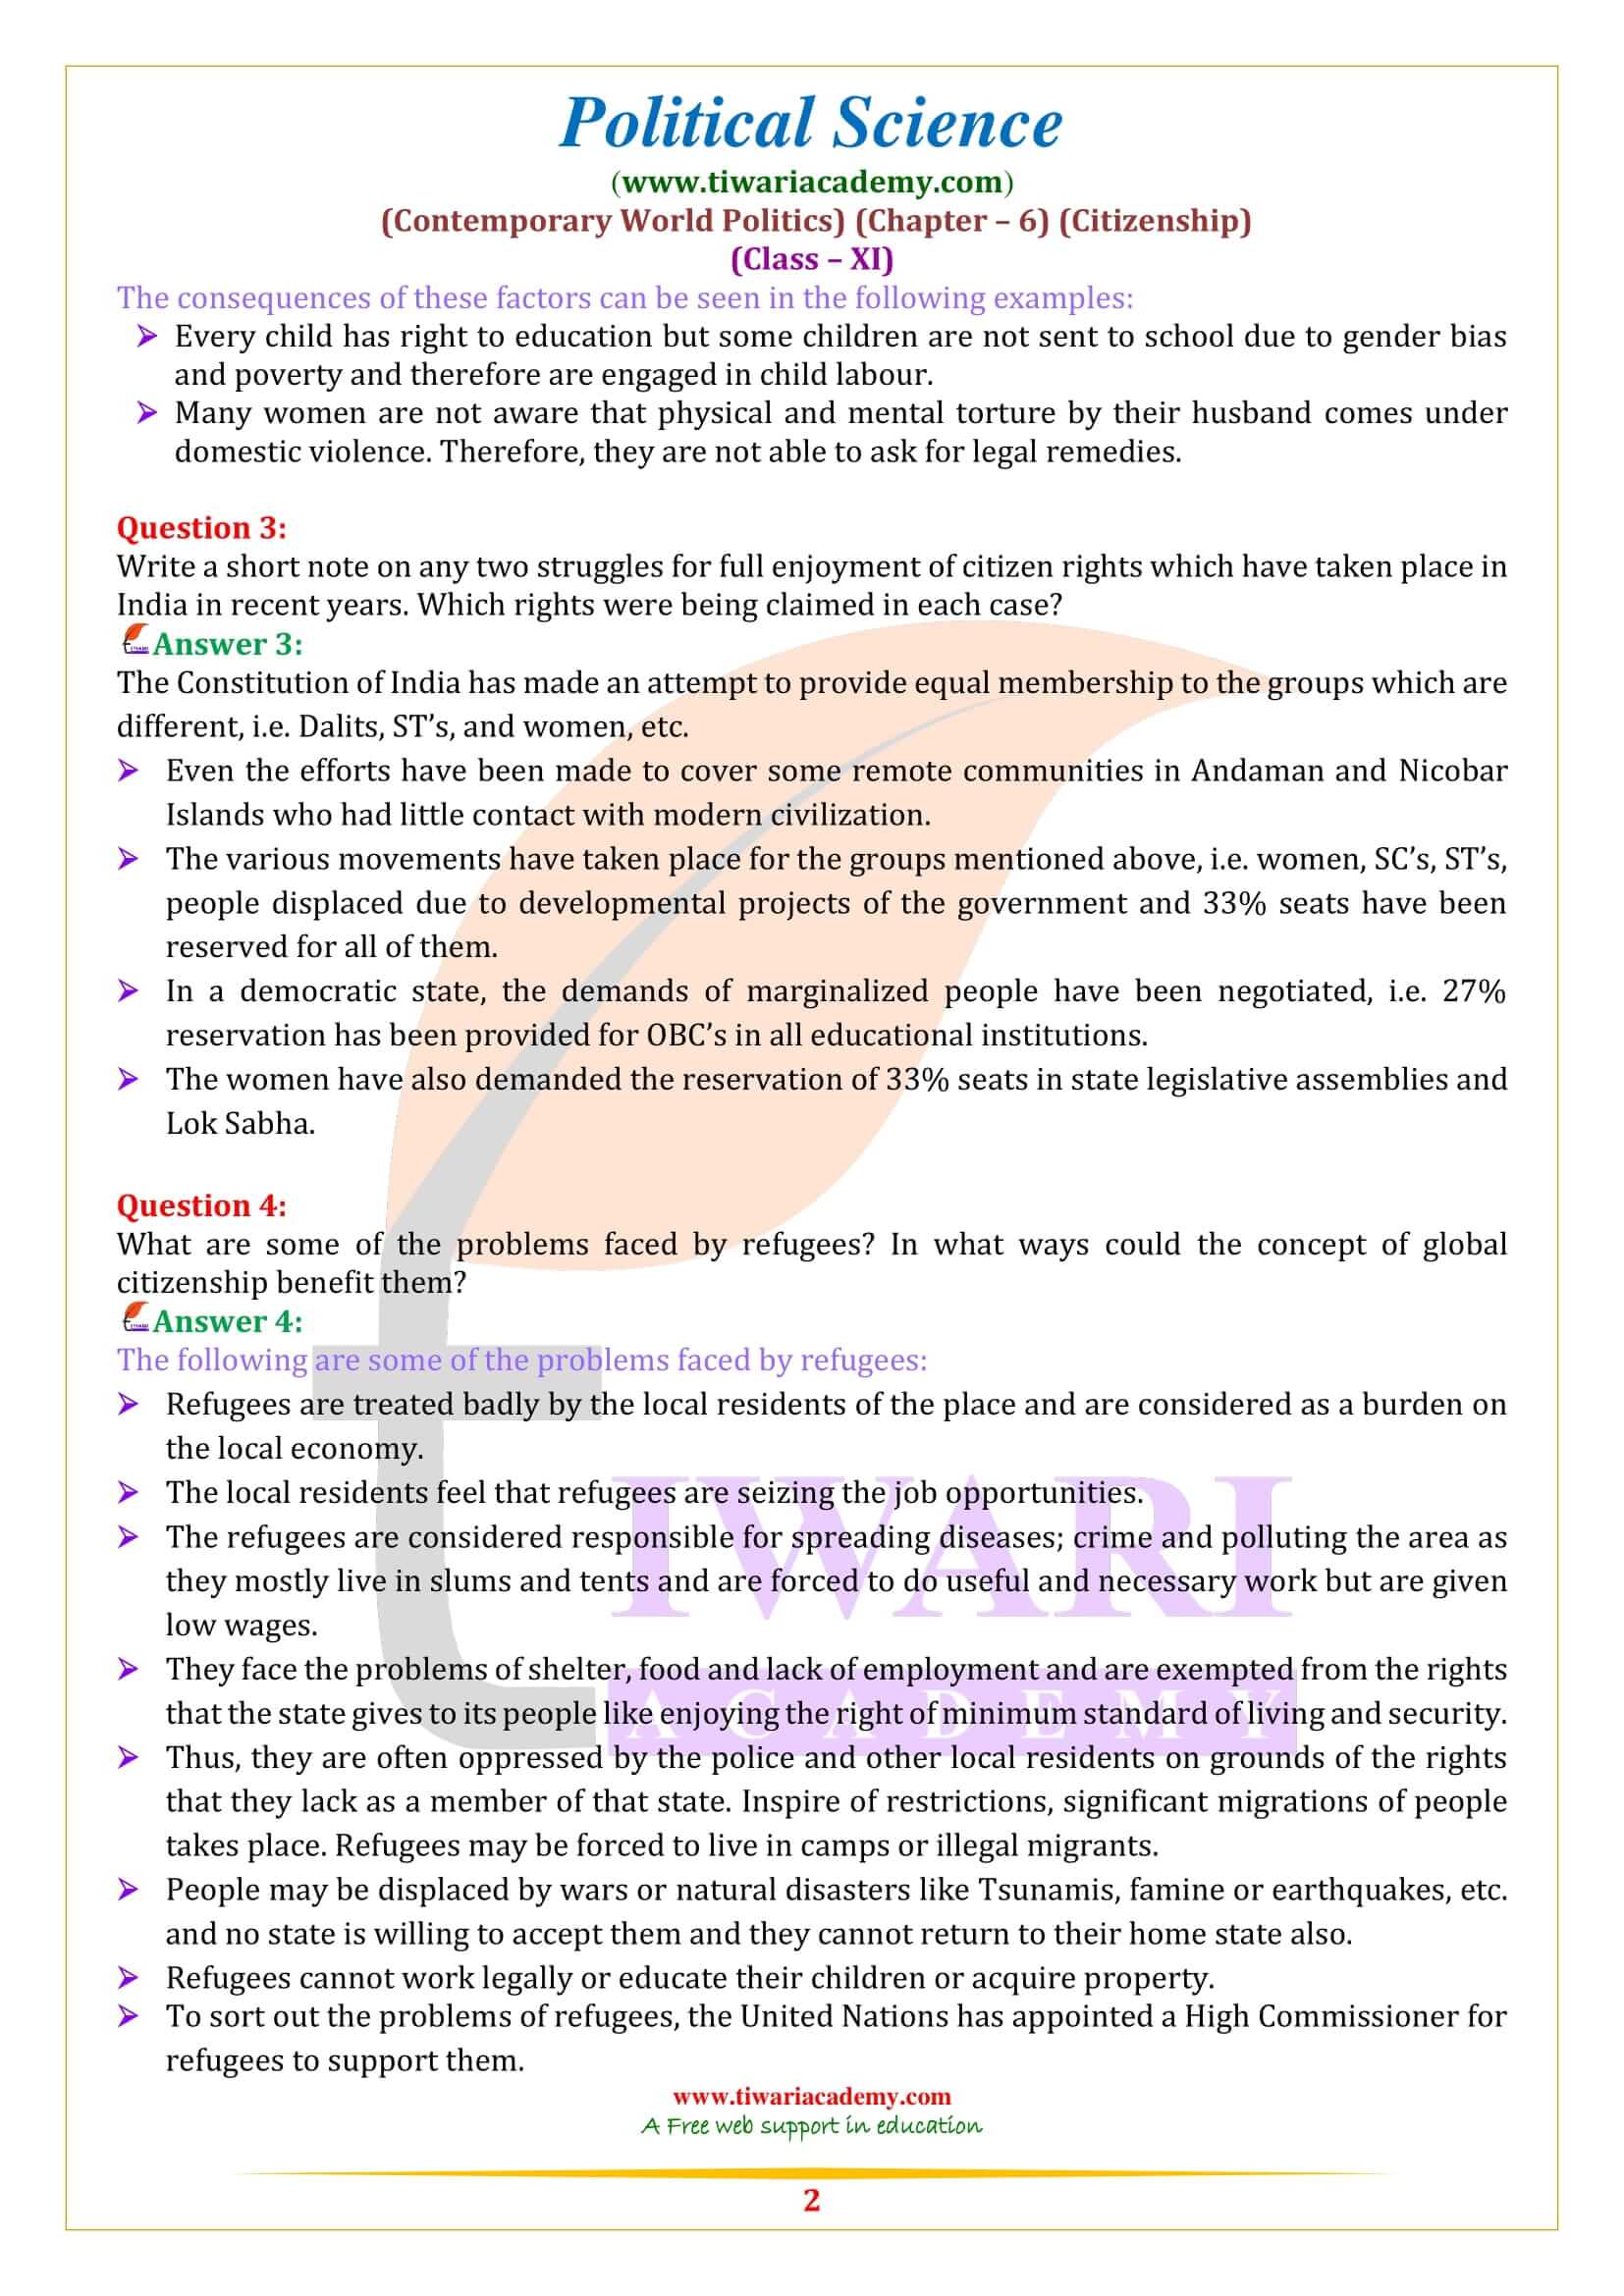 NCERT Solutions for Class 11 Political Science Chapter 6